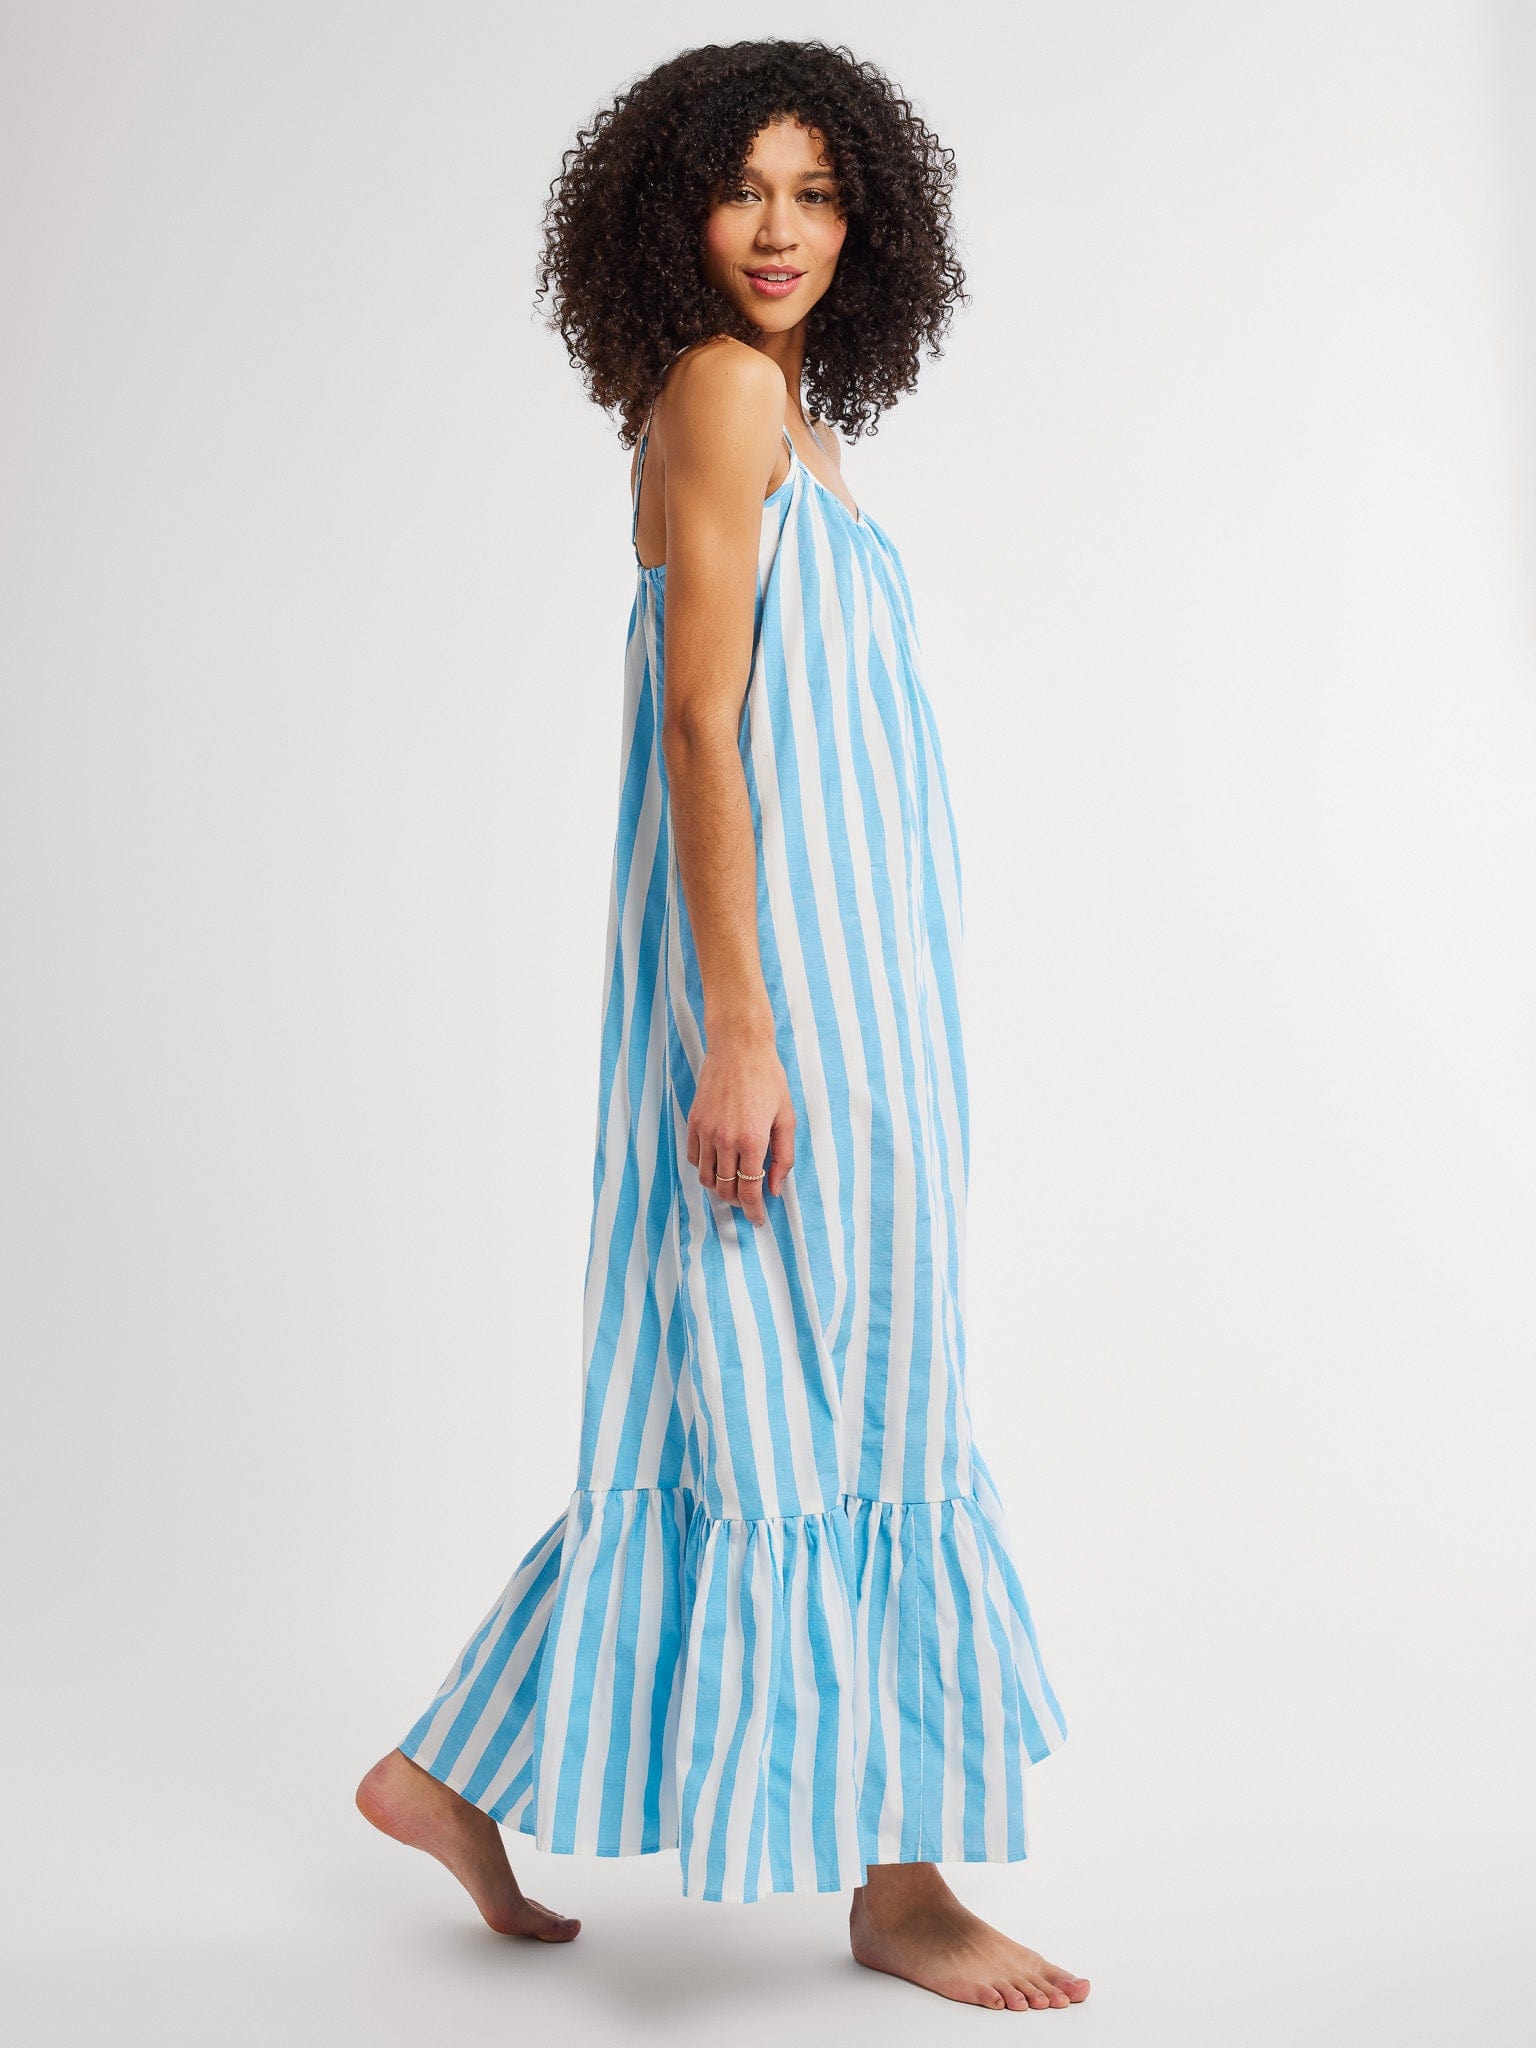 MILLE Clothing Sienna Dress in Atoll Stripe